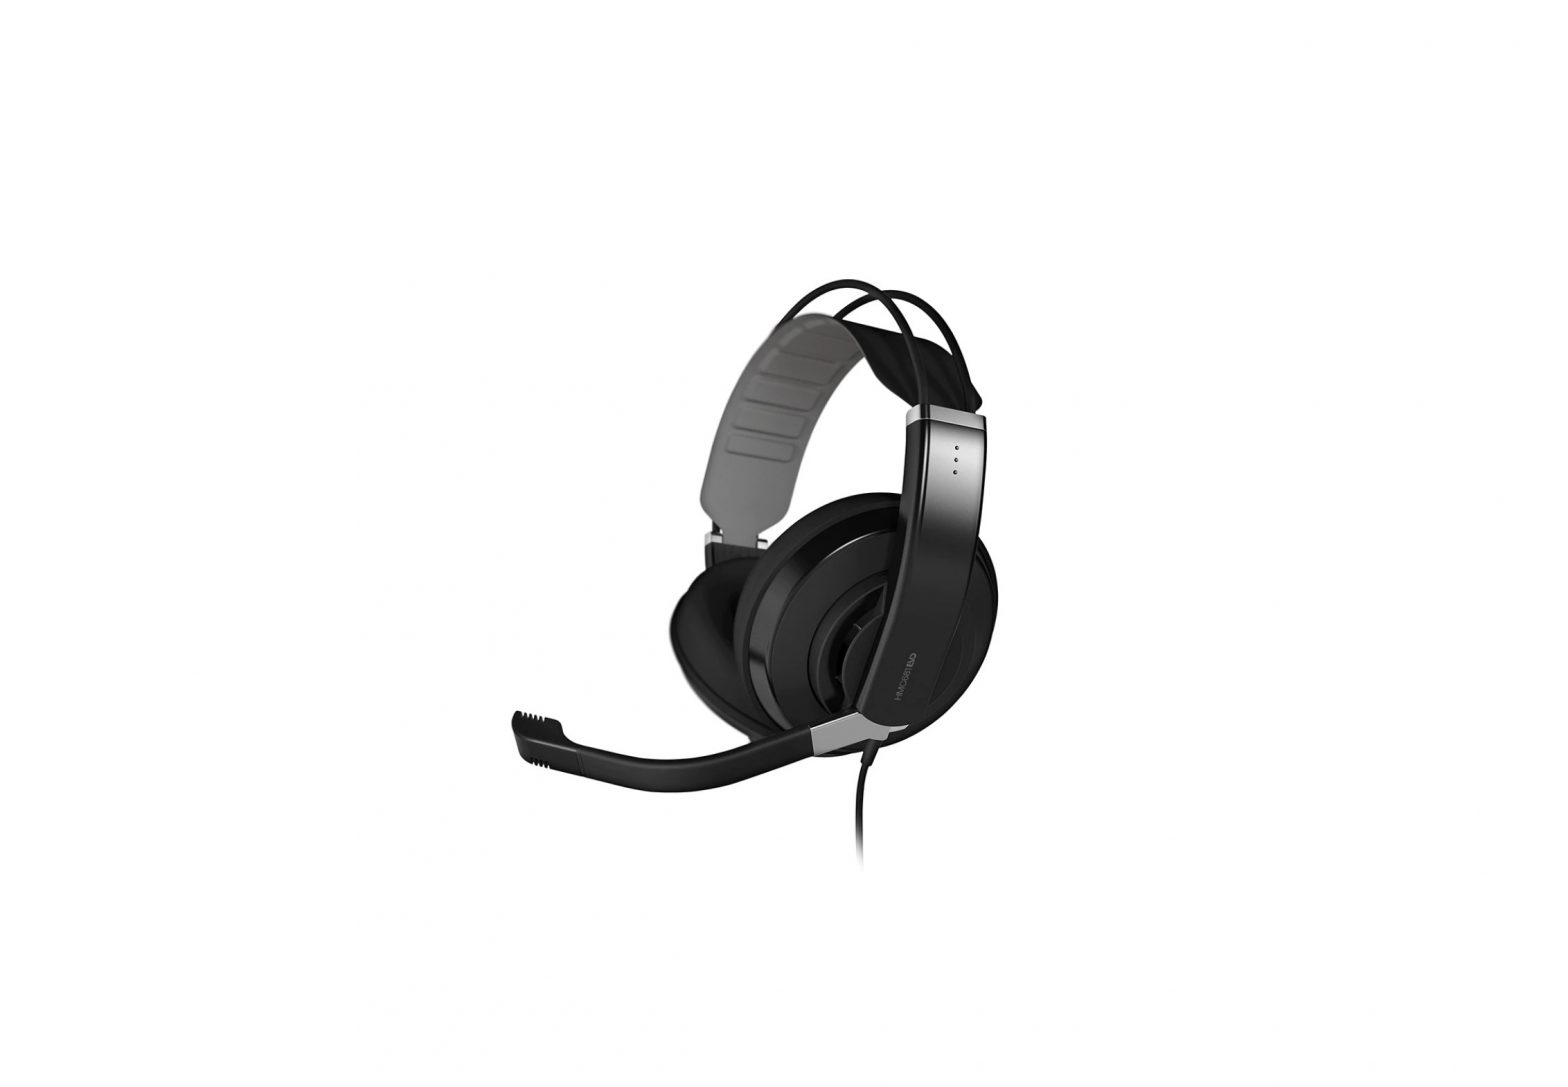 Superlux HMC681EVO Gaming Headset for PC Instructions